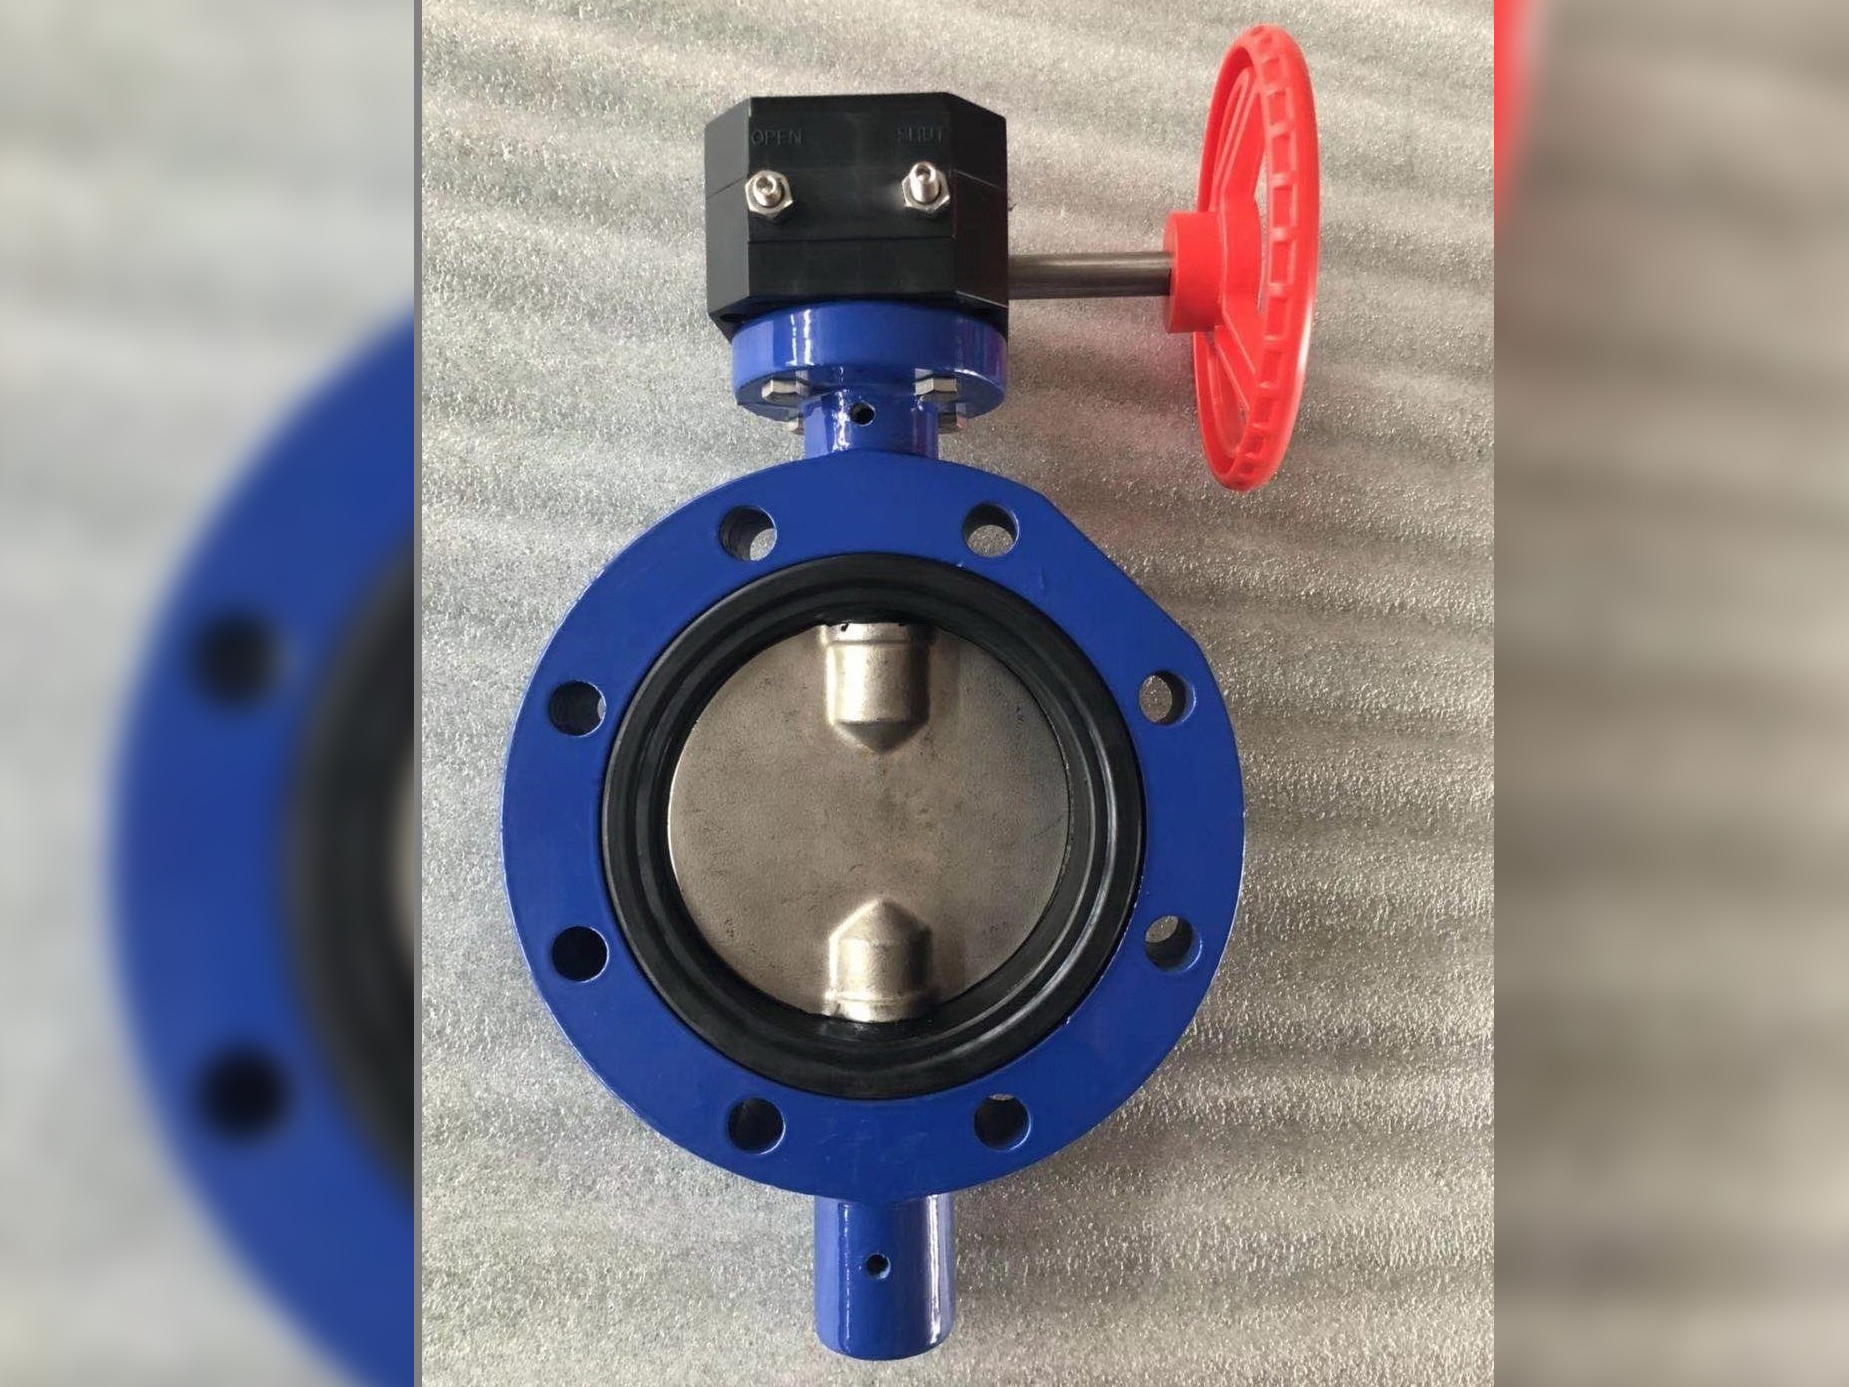 Installation of Double Half Axis Non Pin Butterfly Valves in China: An Engineering Innovation that Disrupts Traditional Concepts